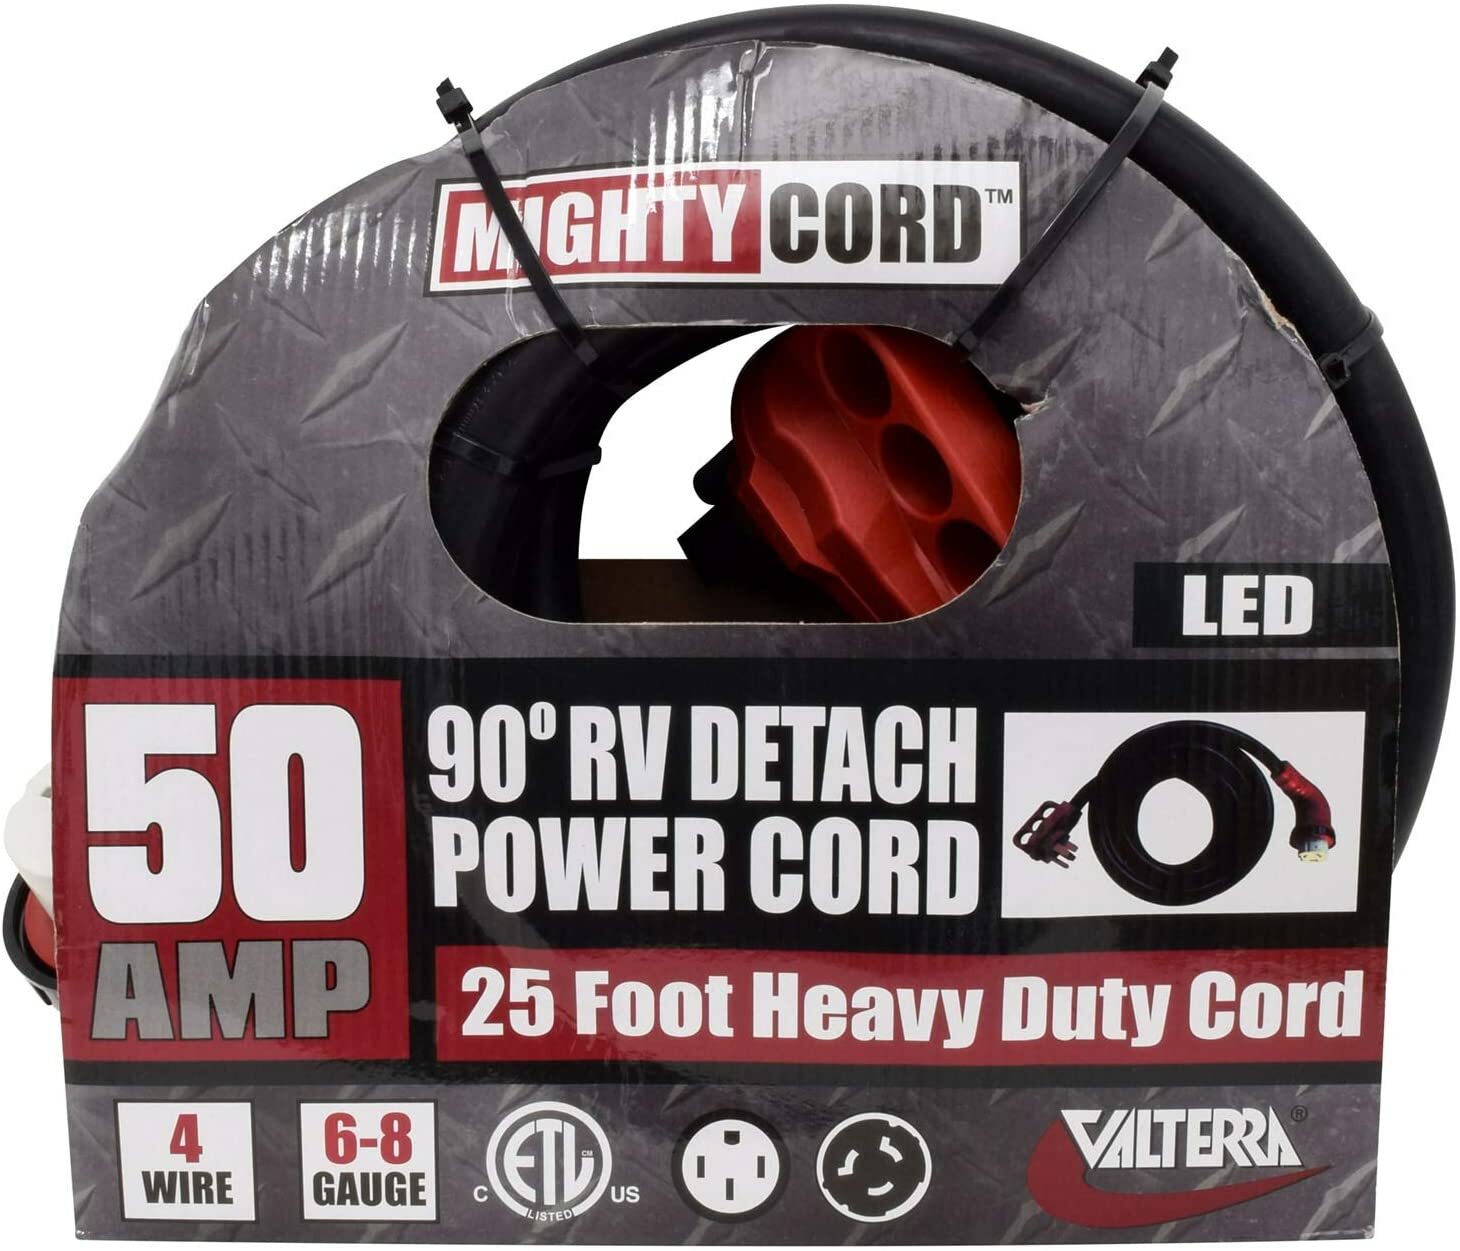 Valterra Mighty Cord® RV 30-Amp 90-Degree Detachable Power Cord, 25-Foot Cord for RV, Red